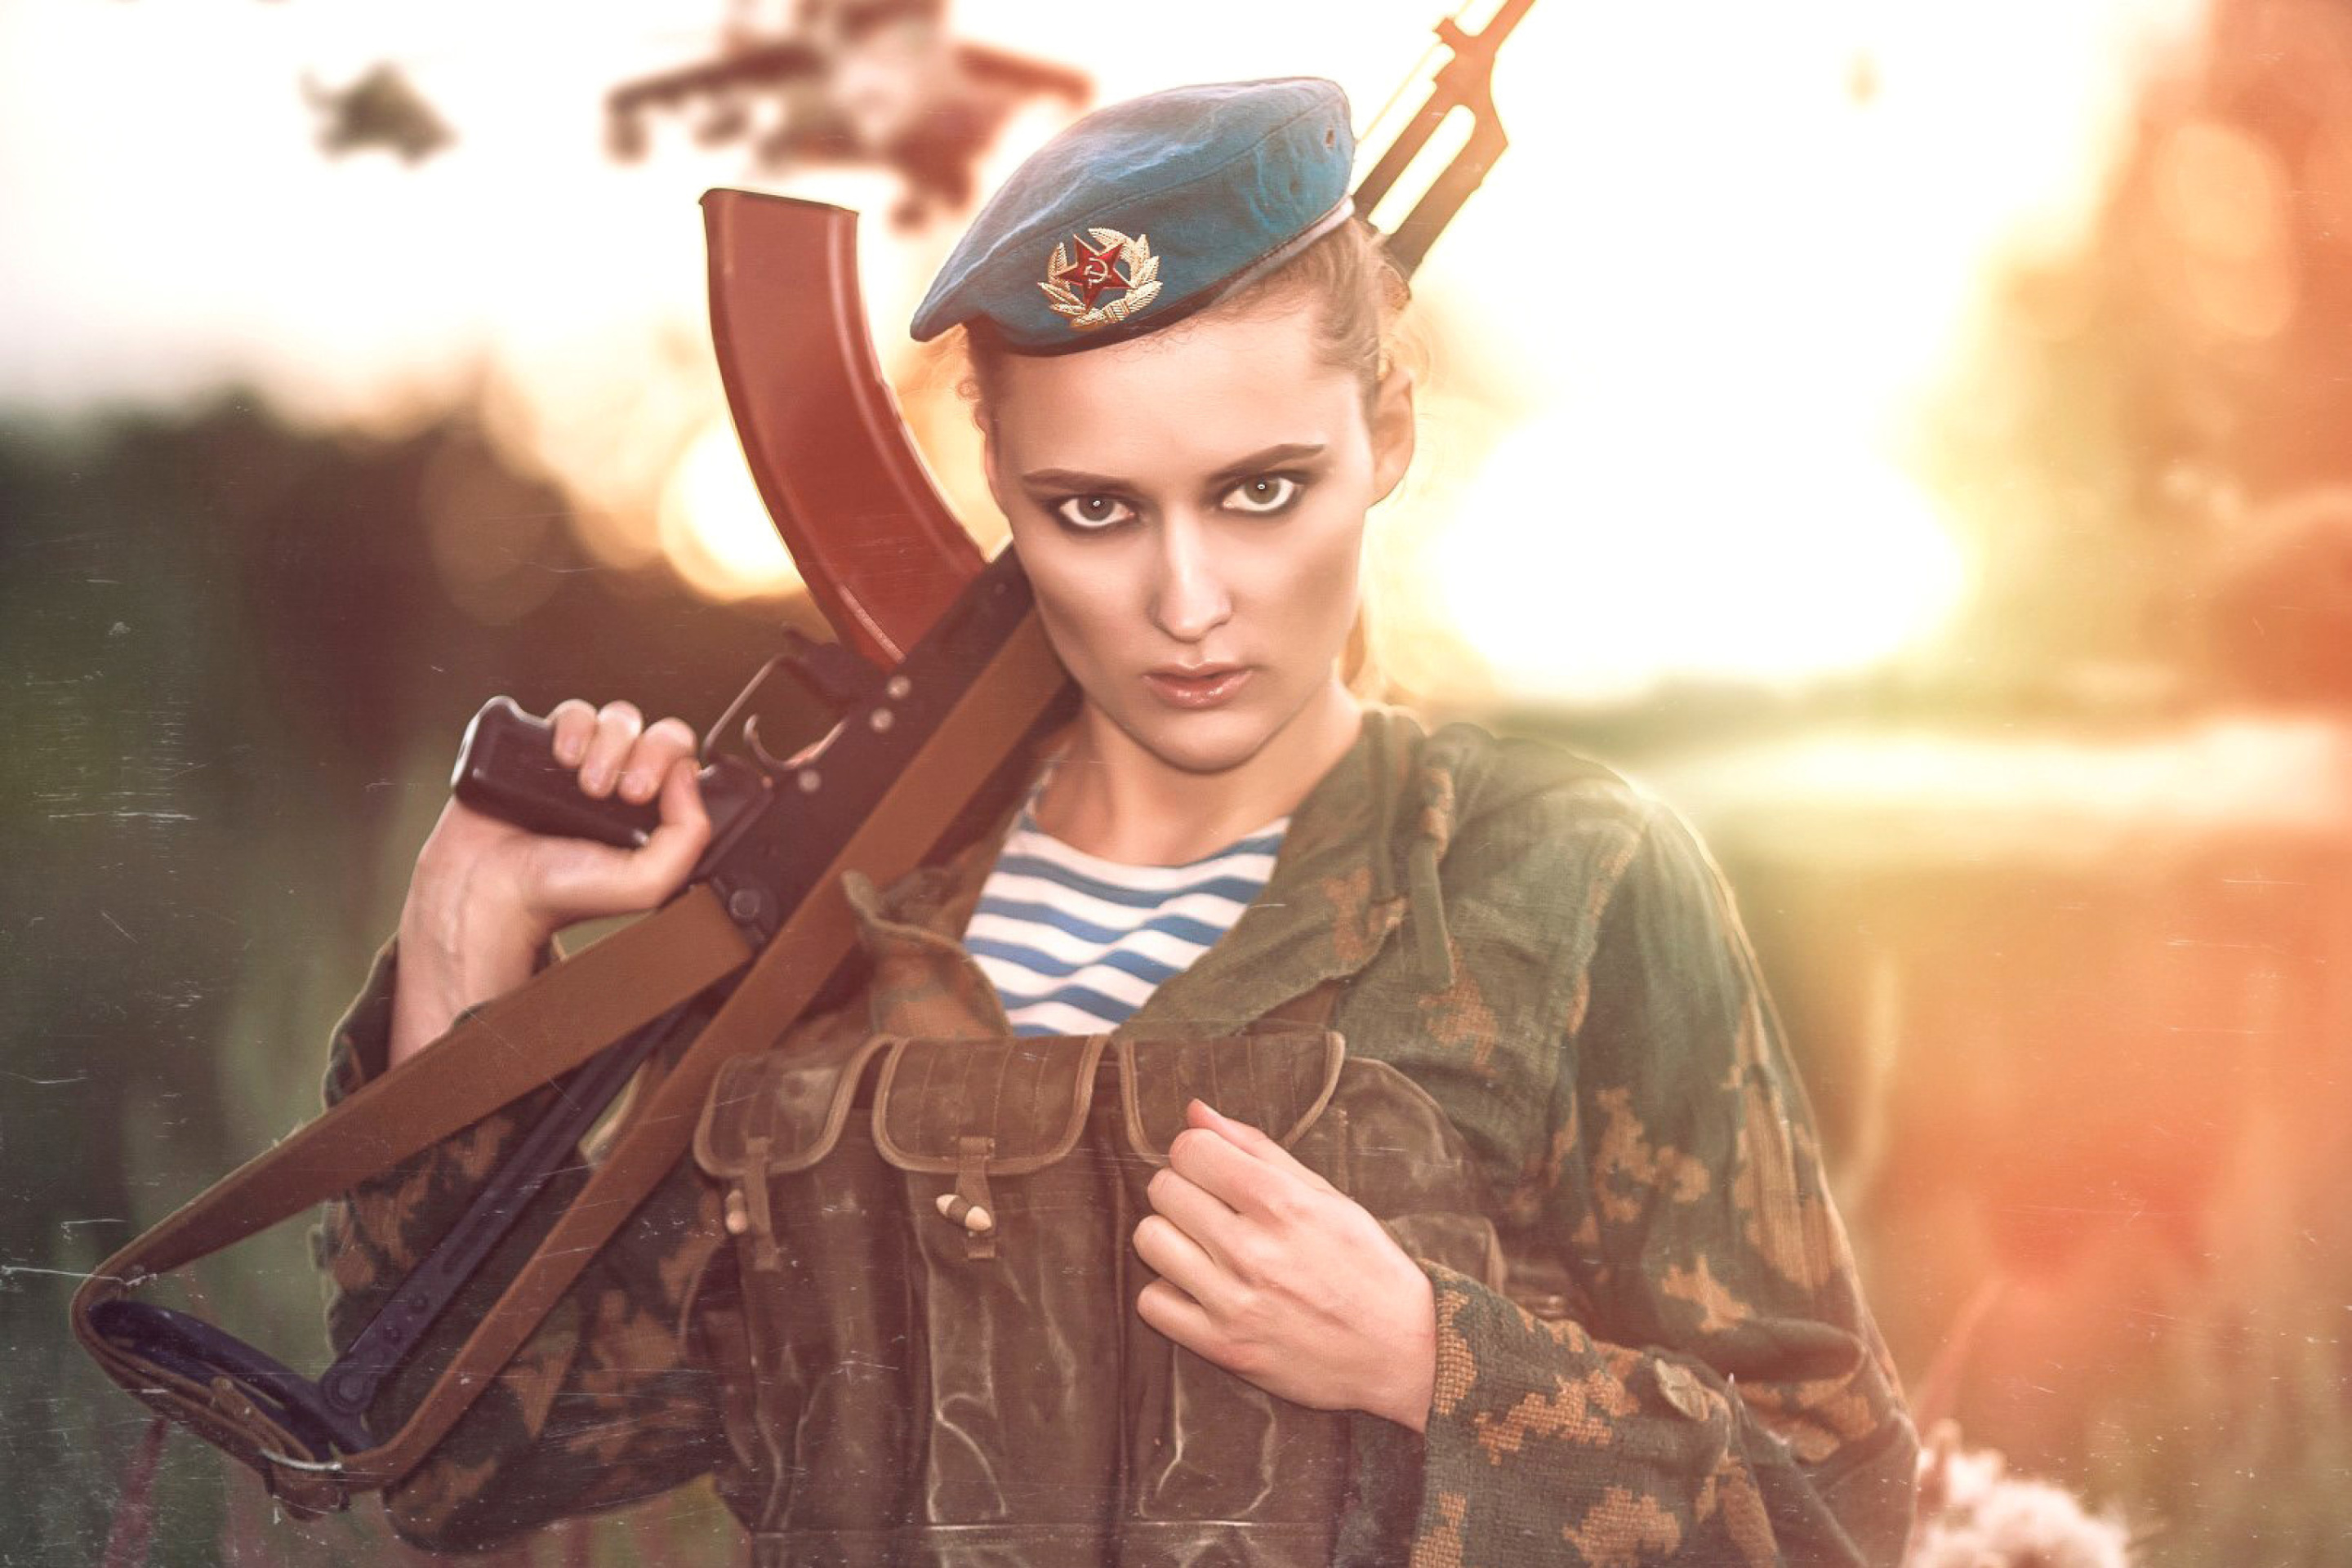 Russian Girl and Weapon HD wallpaper 2880x1920